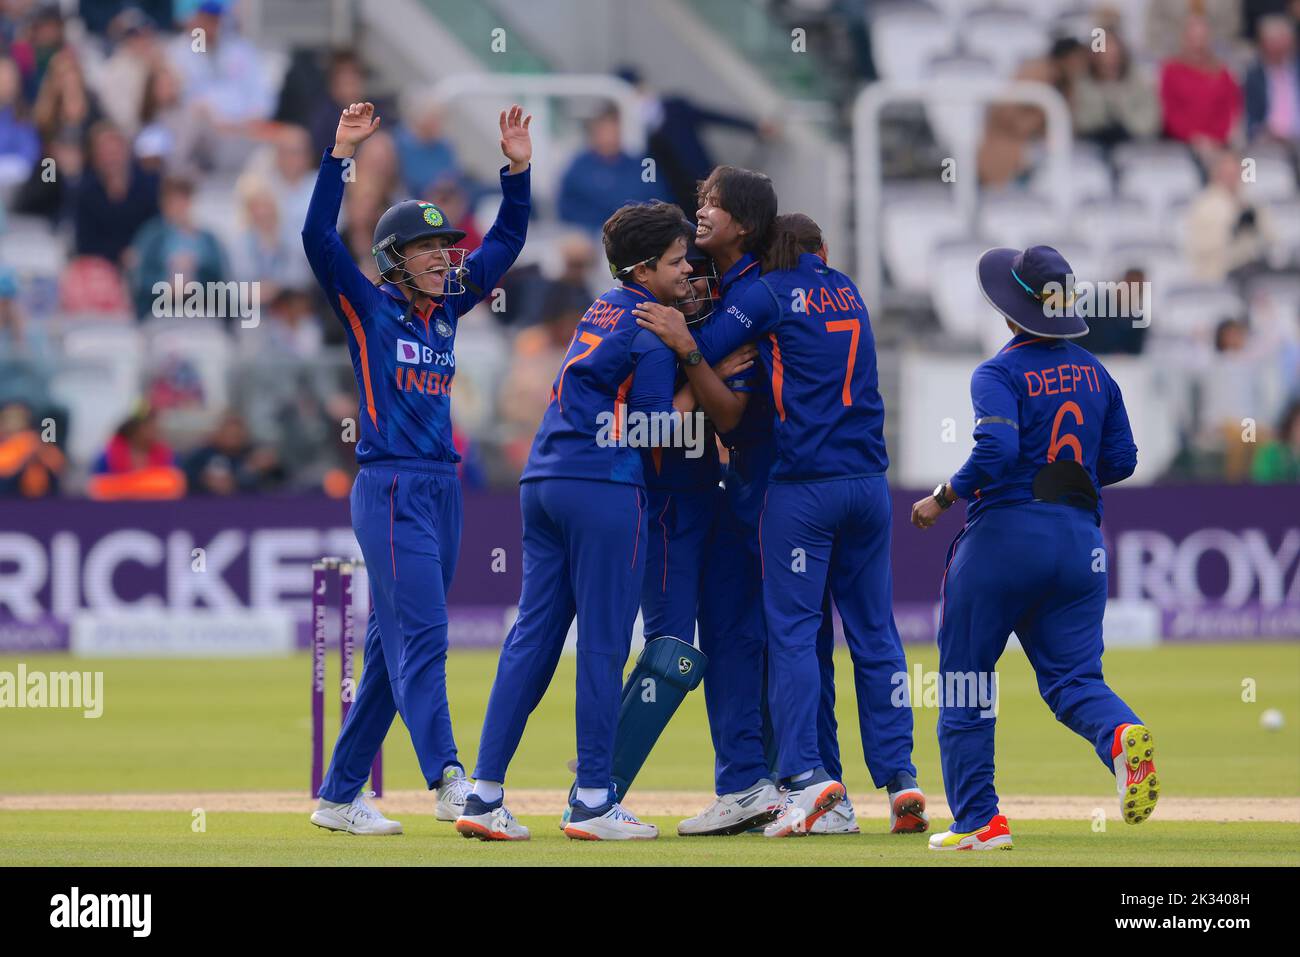 24 September , 2022, London, UK. India celebrate with Jhulan Goswami after the dismissal of Alice Capsey as England women take on India in the 3rd Royal London One Day International at Lords. David Rowe/Alamy Live News. Stock Photo